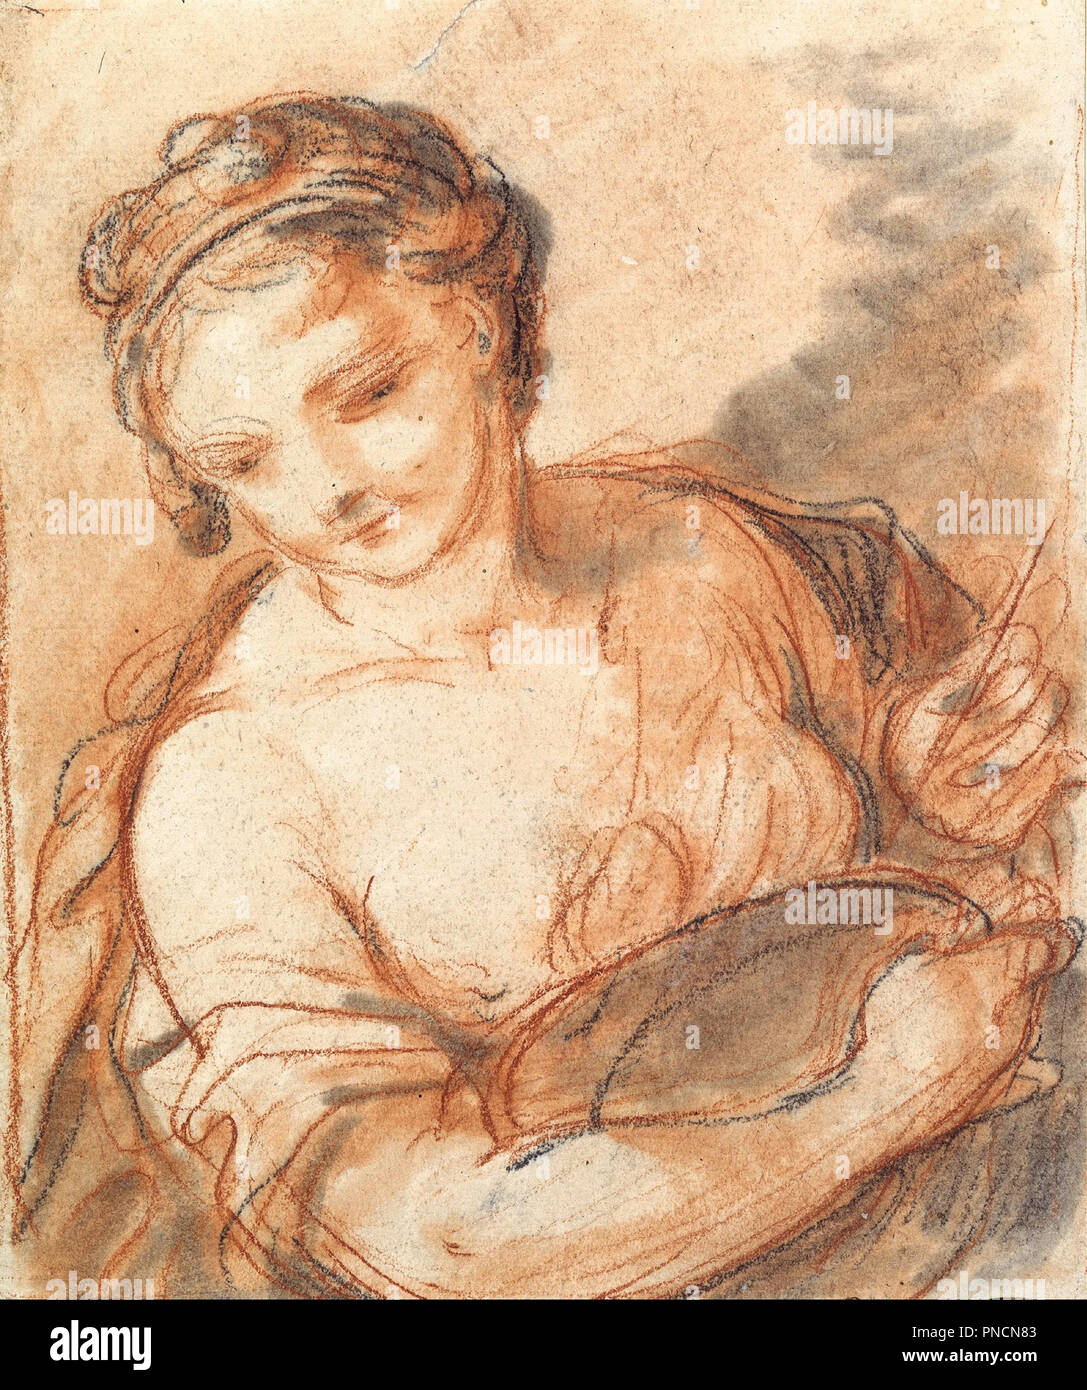 Allegory of Painting. Date/Period: 1751. Drawing, red and grey wash. Sanguine and black chalk. Height: 209 mm (8.22 in); Width: 172 mm (6.77 in). Author: Charles-Joseph Natoire. Stock Photo